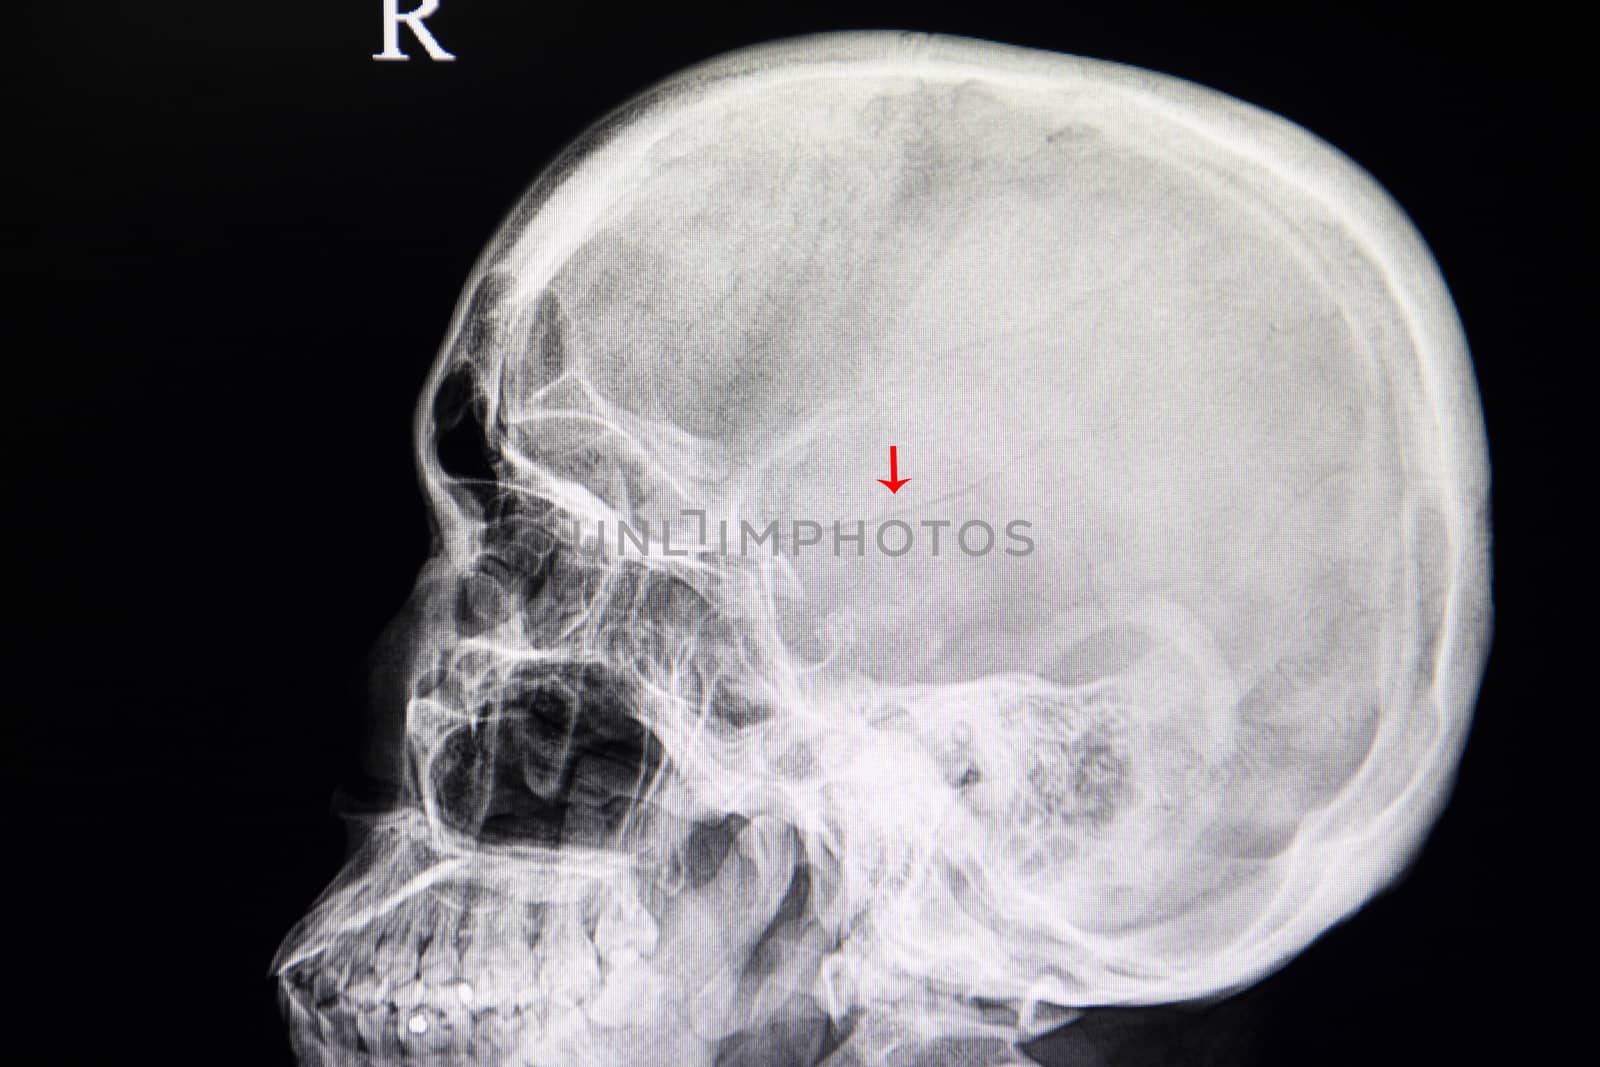 A skull xray film of a traumatic brain injury patient showing a temporoparietal linear fracture of the skull.